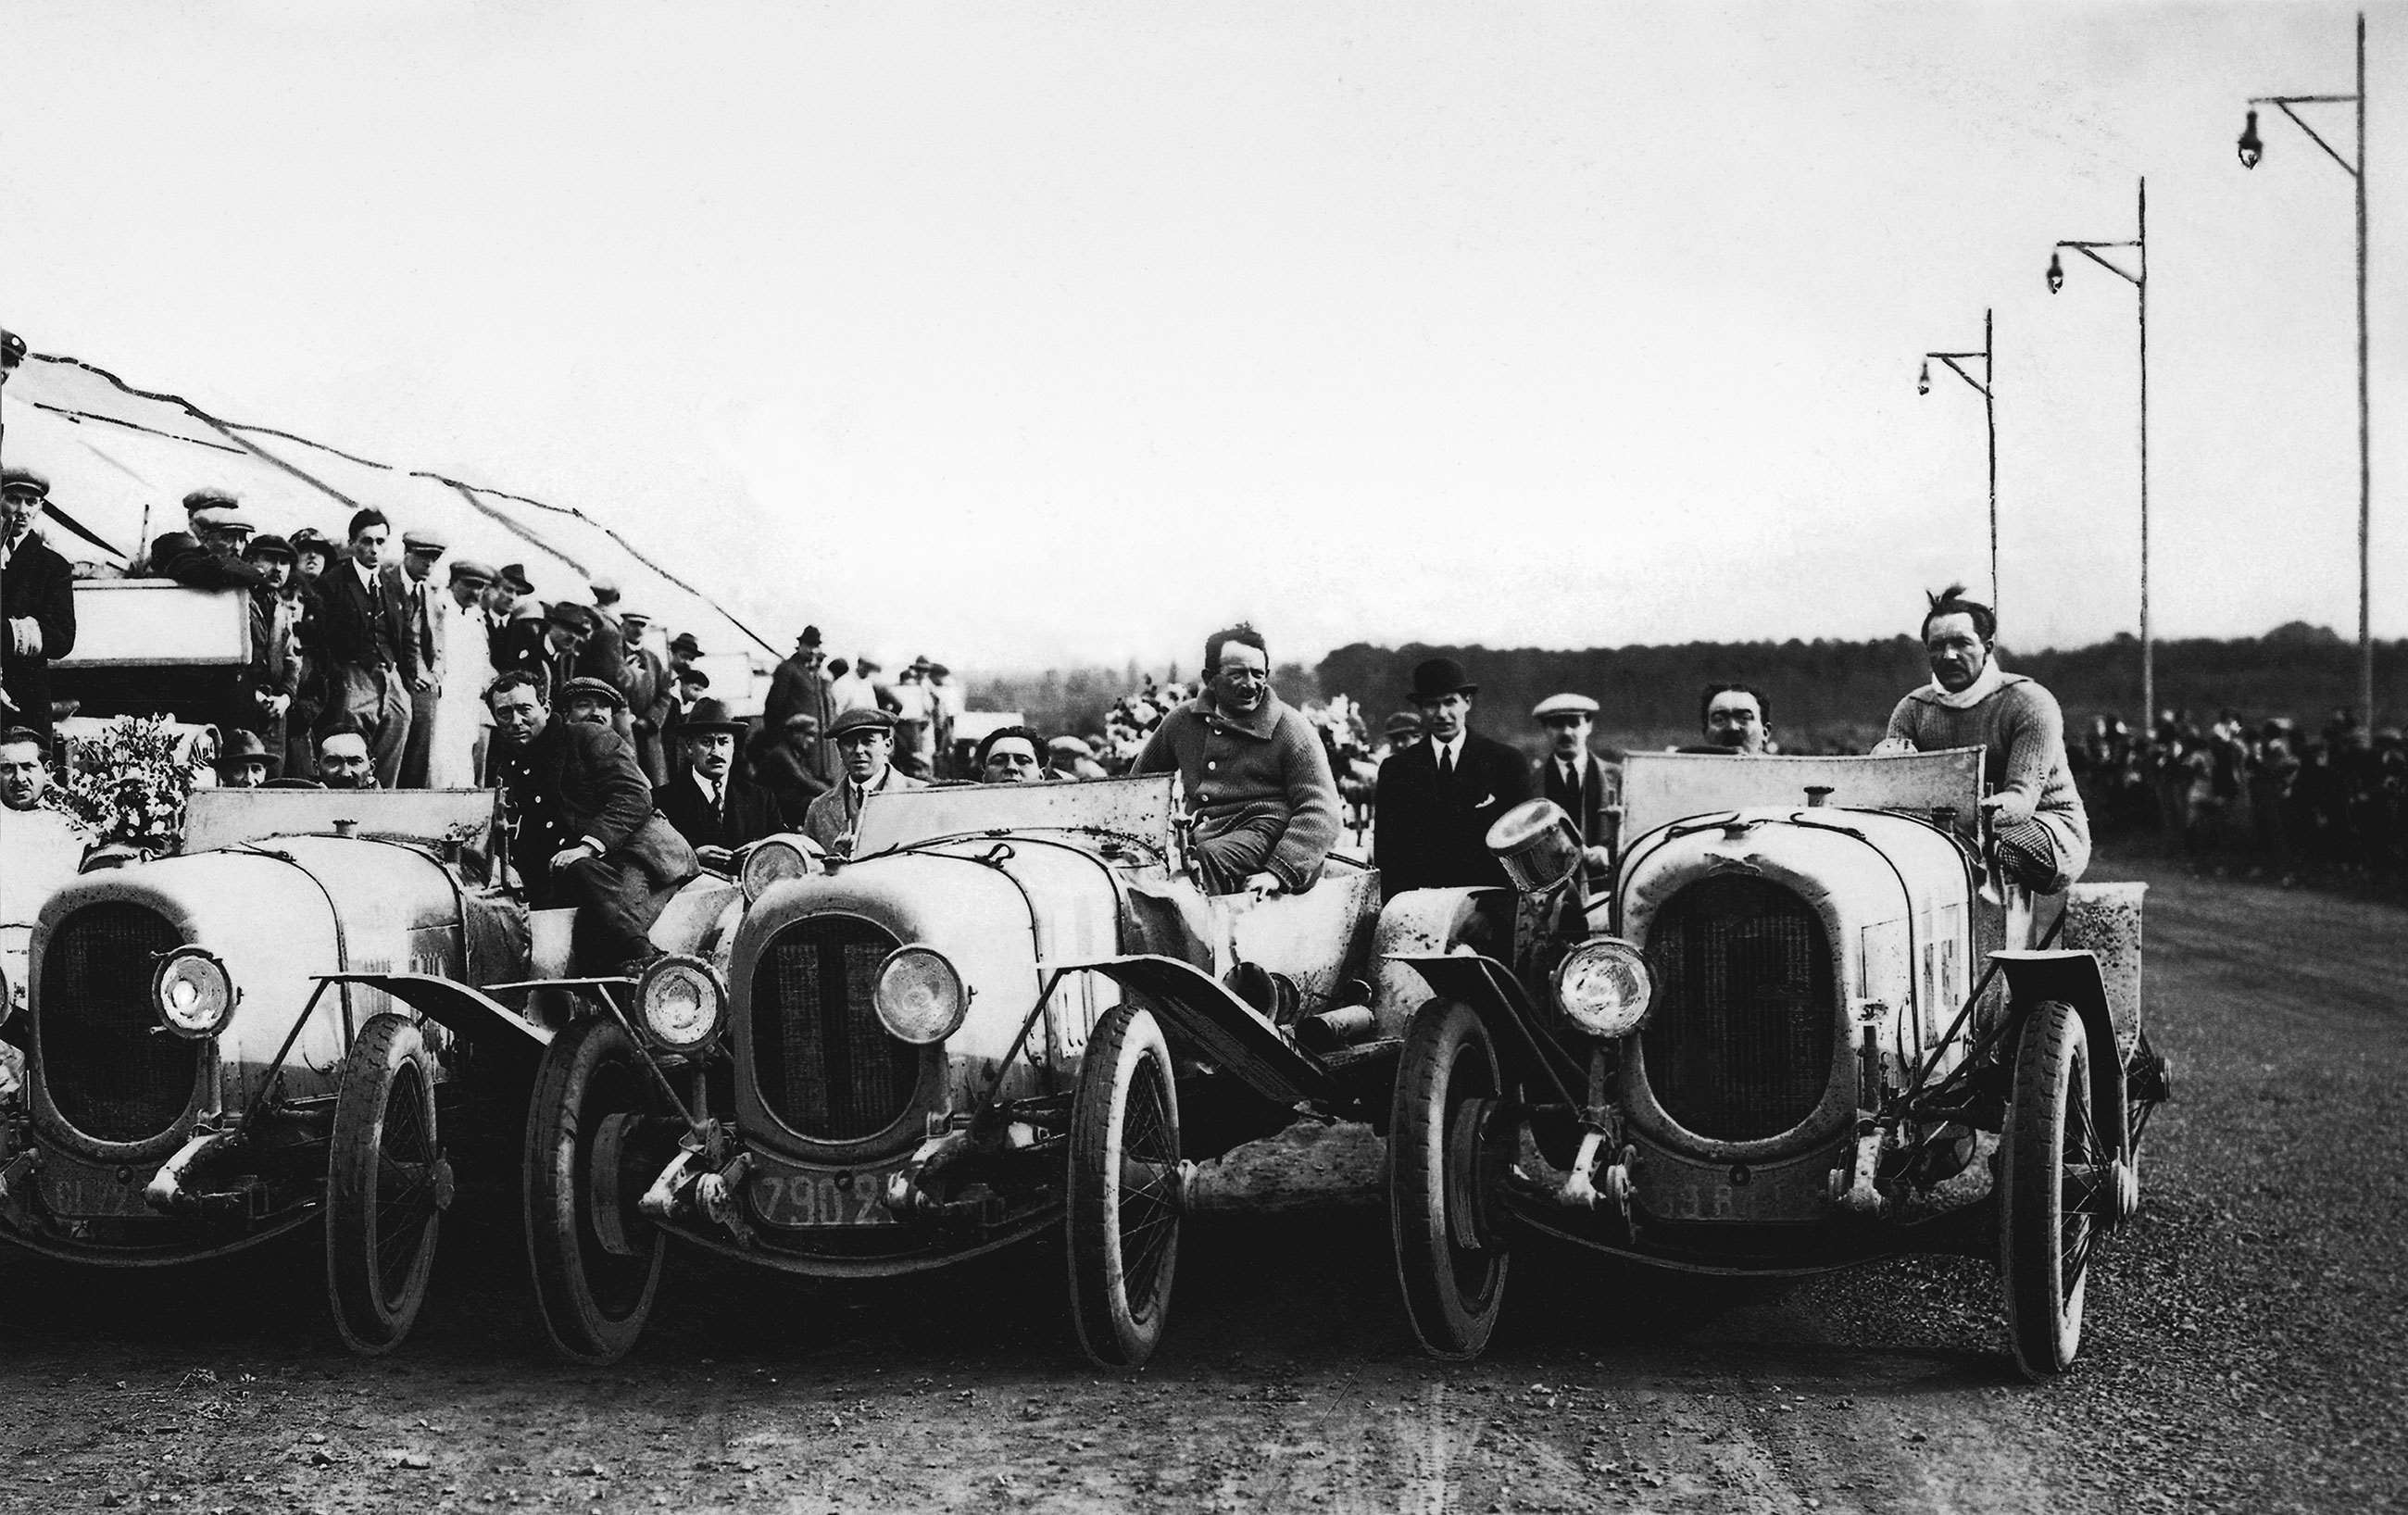 Le Mans 1923 and the Chenard et Walcker team before the race. Left to right, the eventual winners Andre Lagache and Rene Leonard, Fernad Bachmann and Raymond Glazmann (7th) and Raoul Bachmann and Christian Dauvergne (2nd).